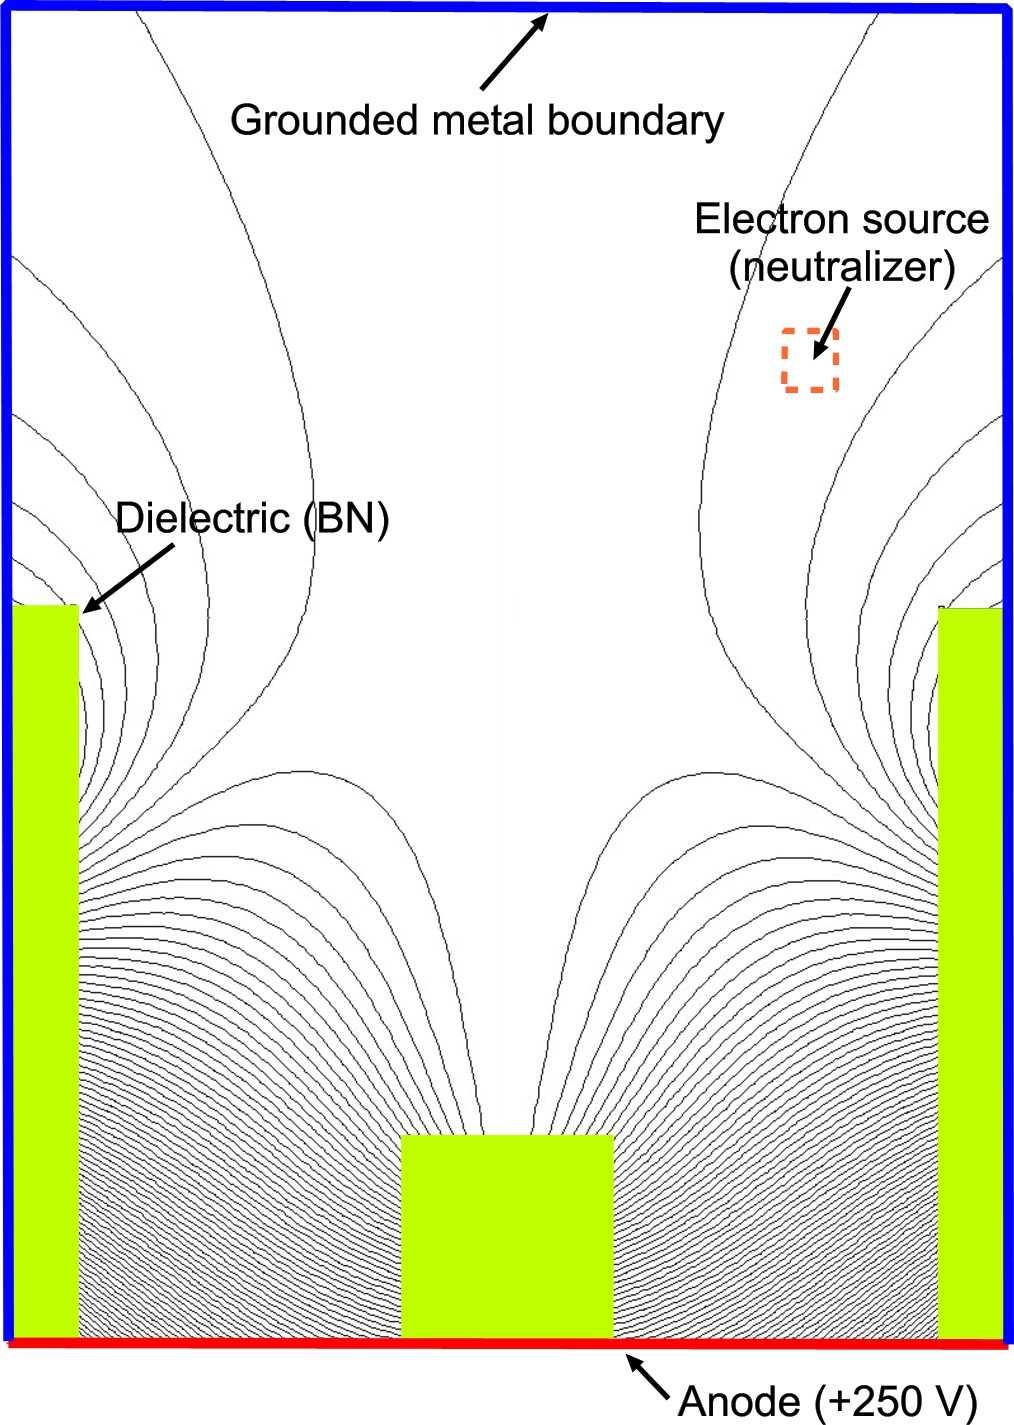 localizing the ionization of the woring gas at the boundary of the annular and cylindrical regions.